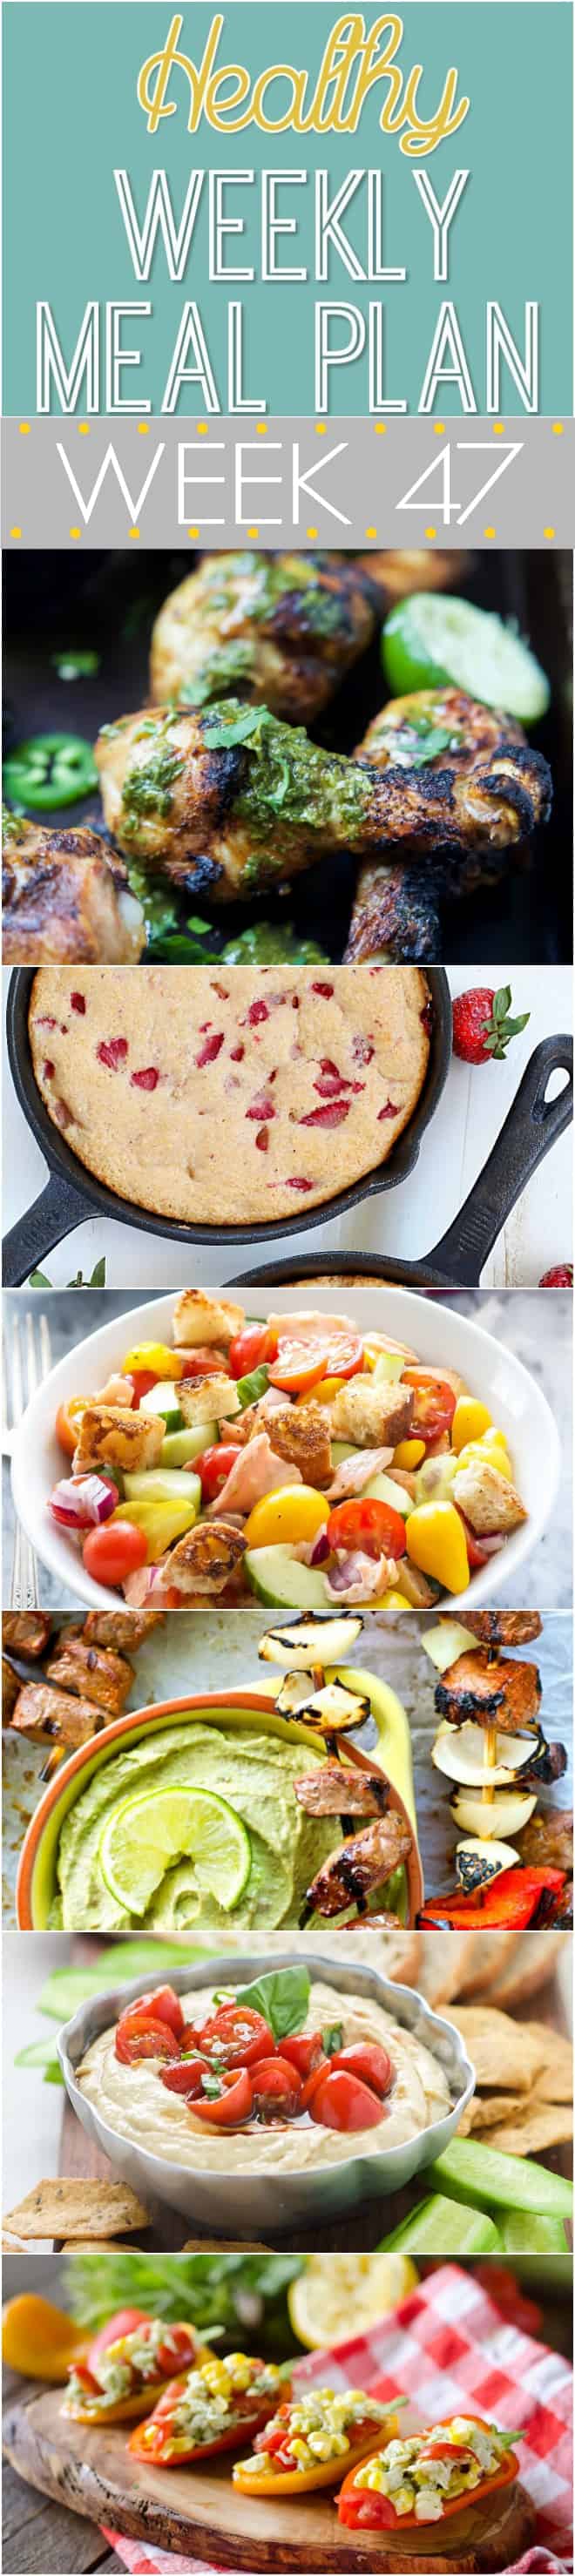 This week we have delicious meals filled with summer flavor; Such as grilled steak and pepper kabobs and Fruit & Goat Cheese Chicken Bowls!